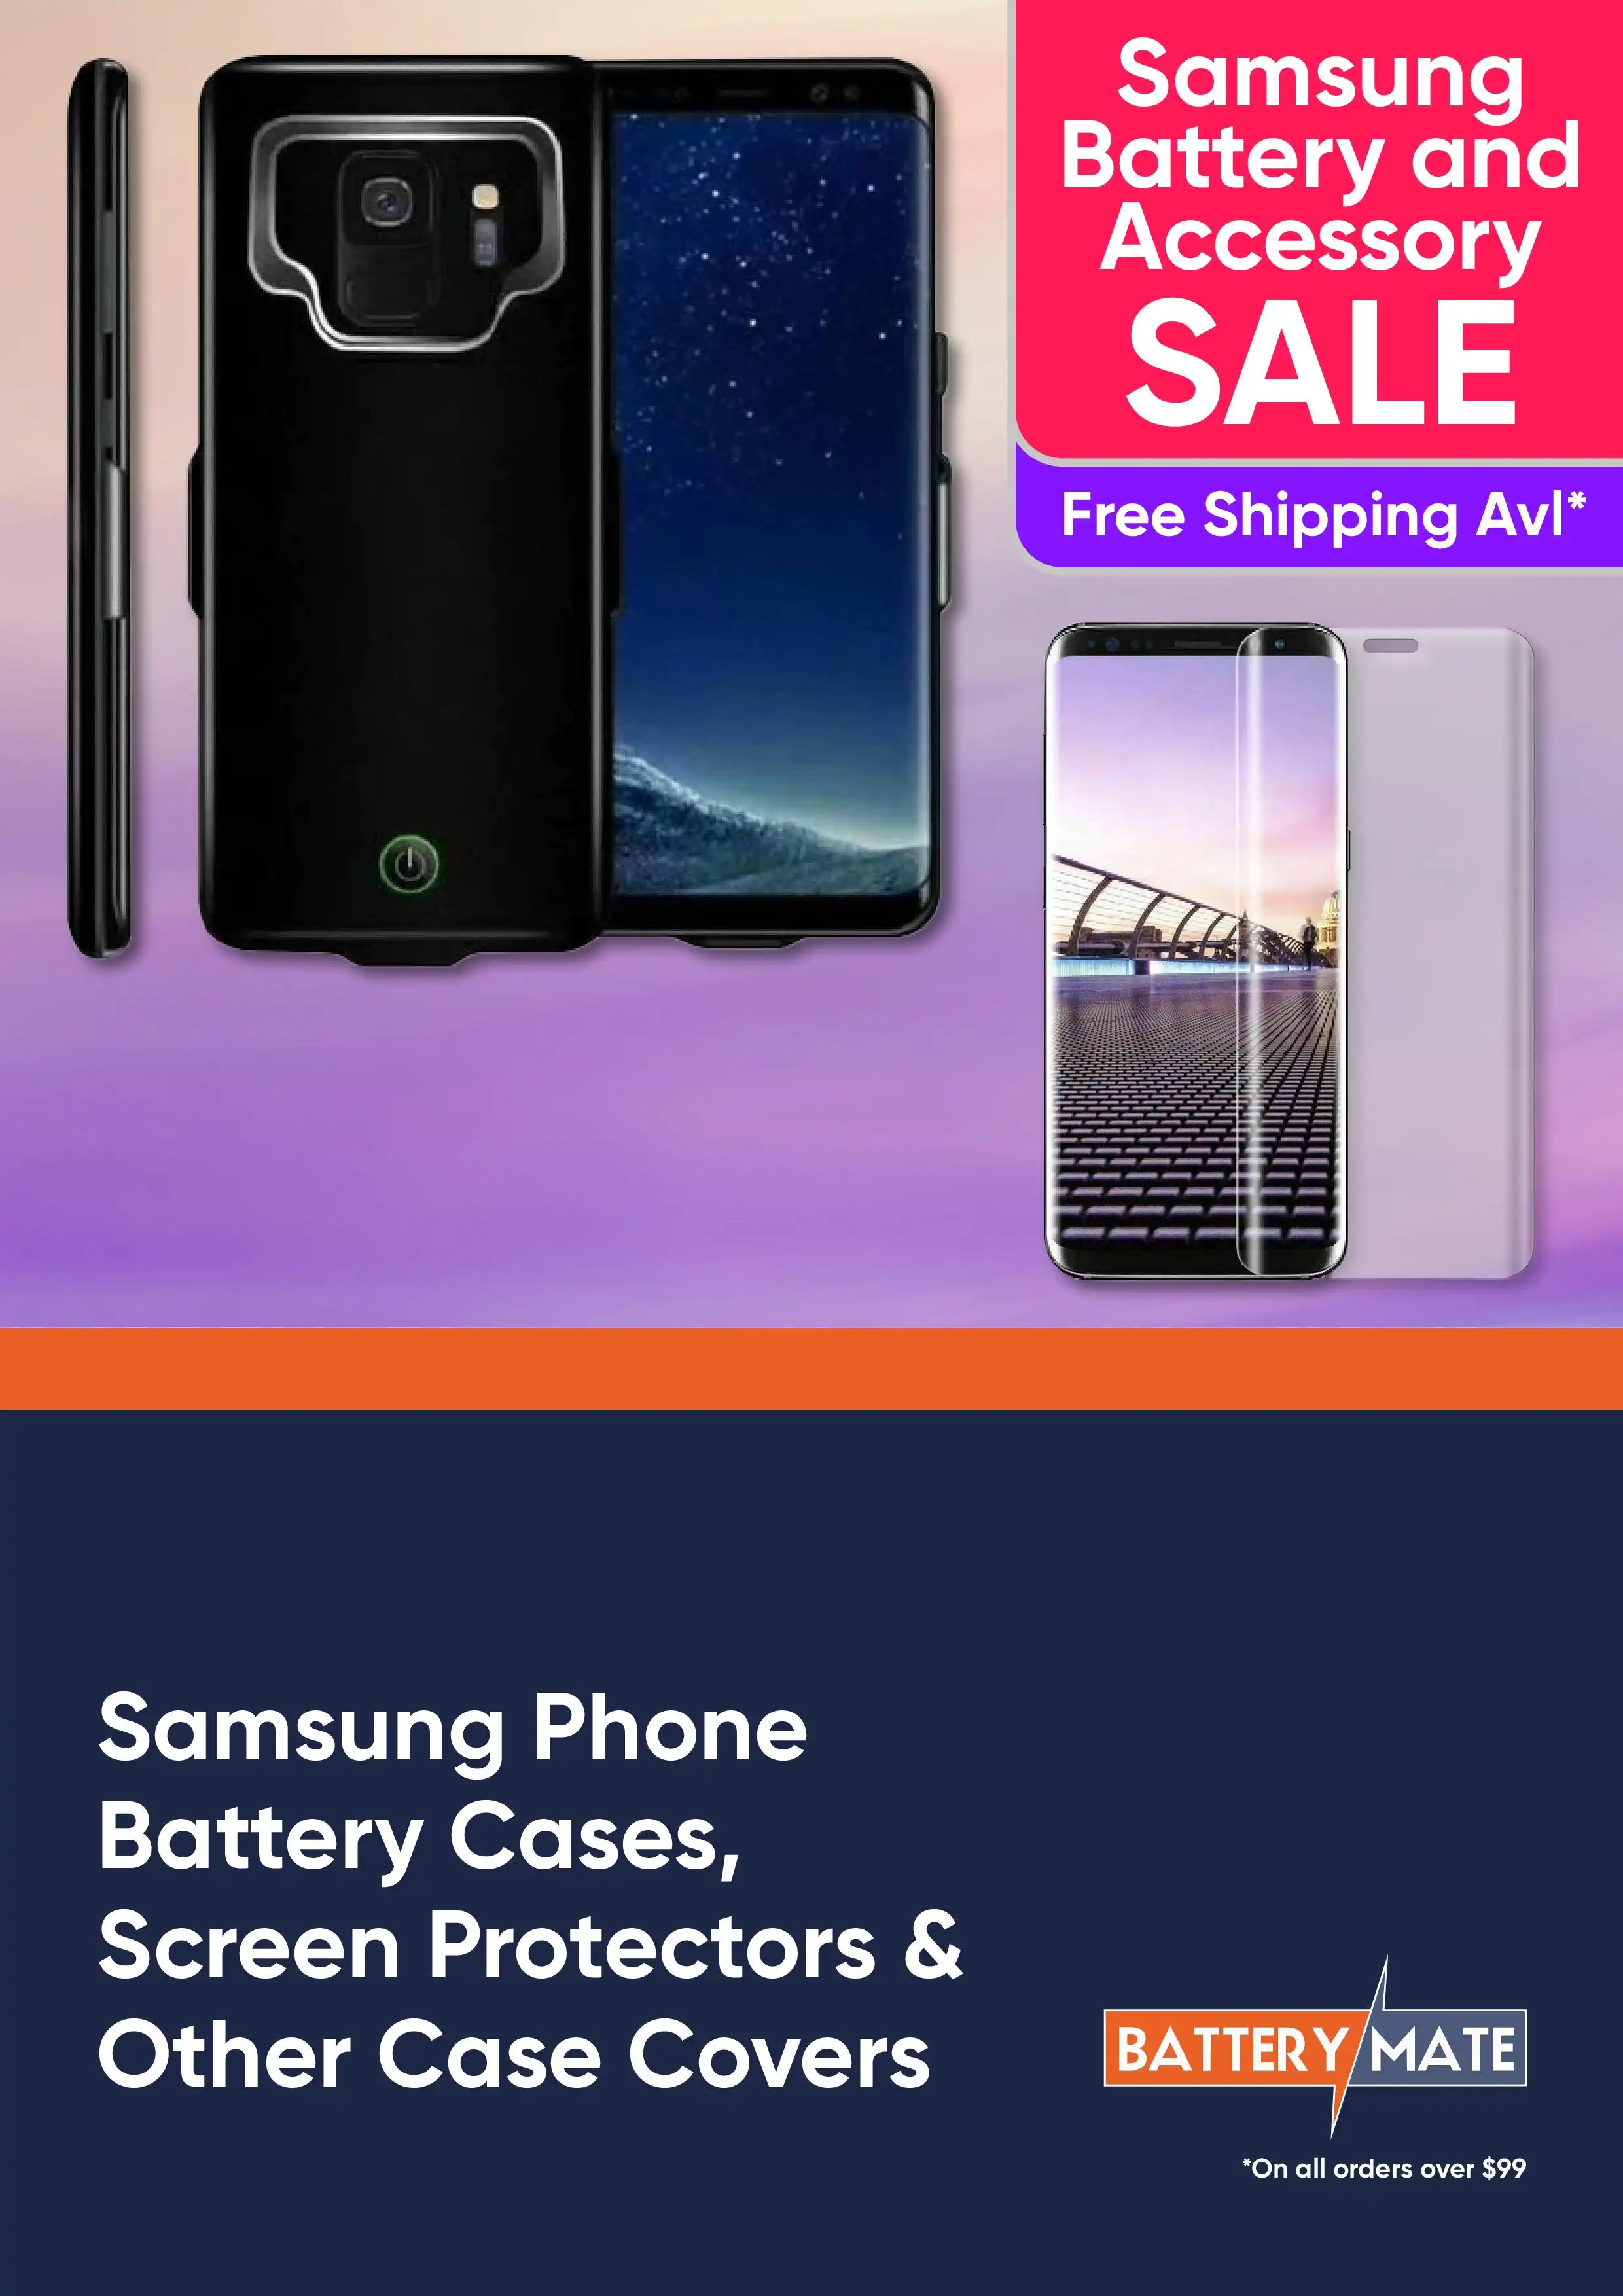 Samsung Phones Battery Cases, Screen Protectors and Other Case Covers